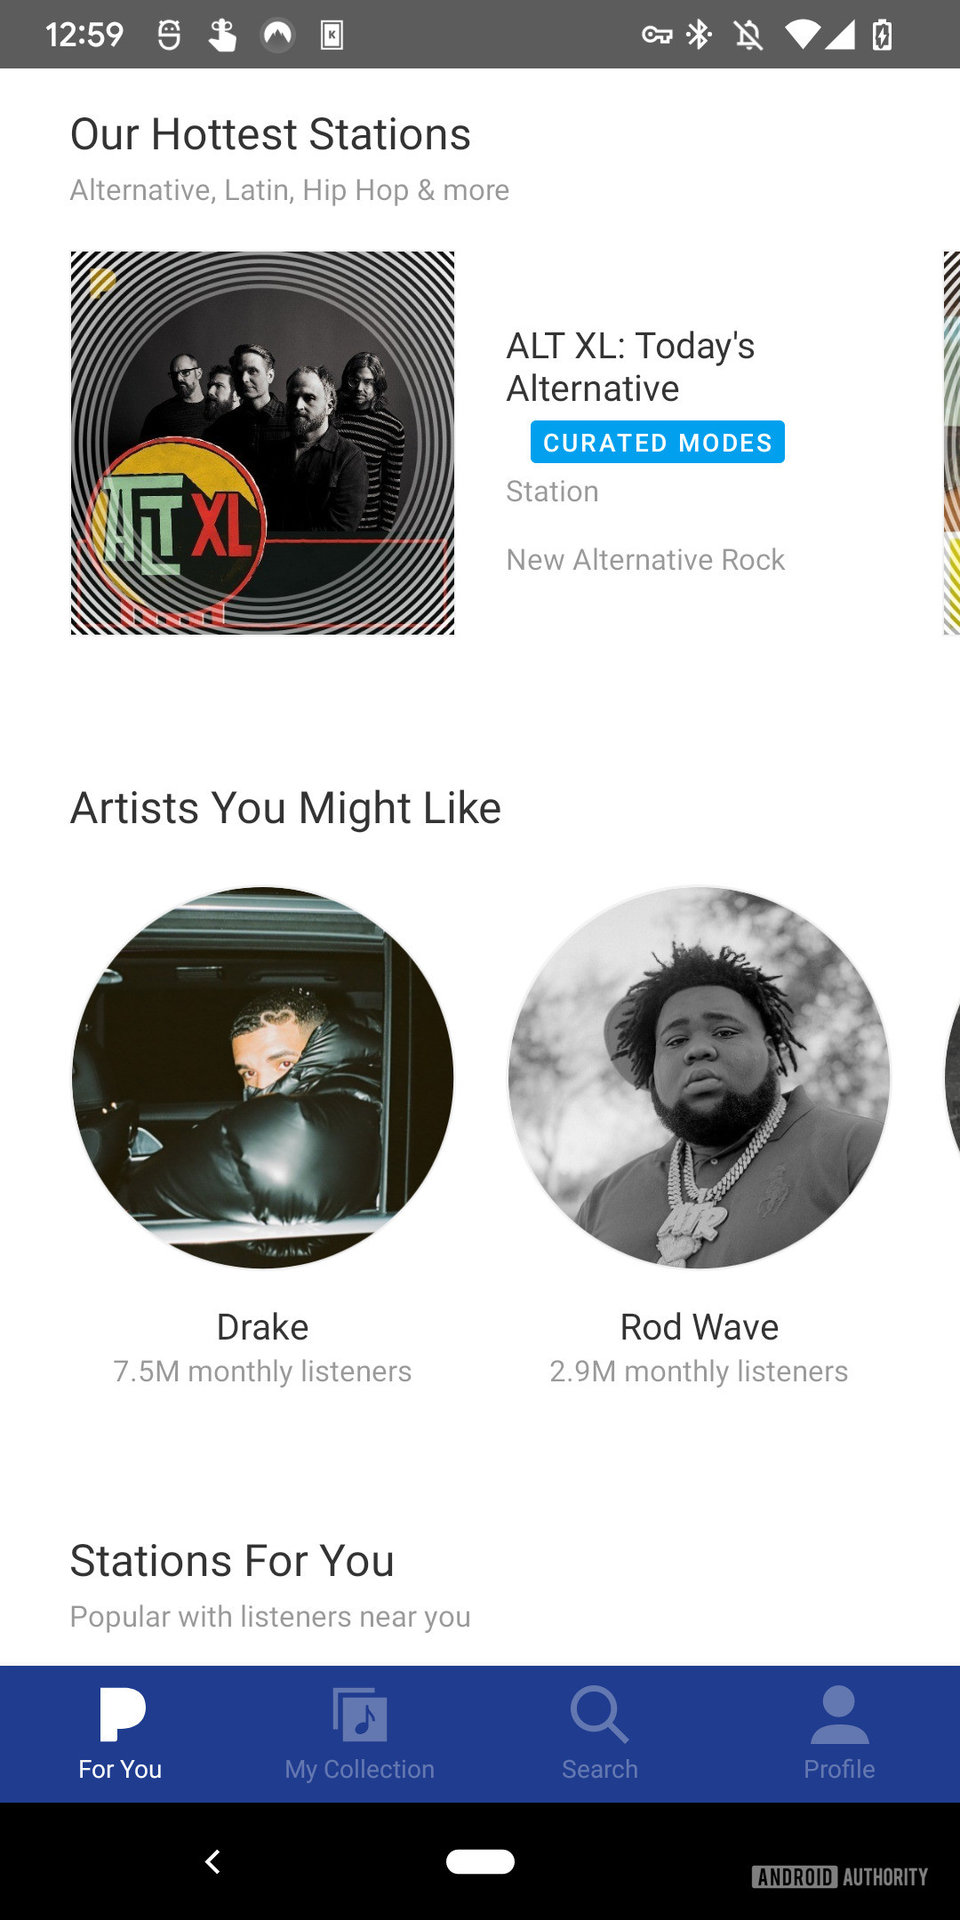 Screenshot of the Pandora app showing the Artists You Might Like section.